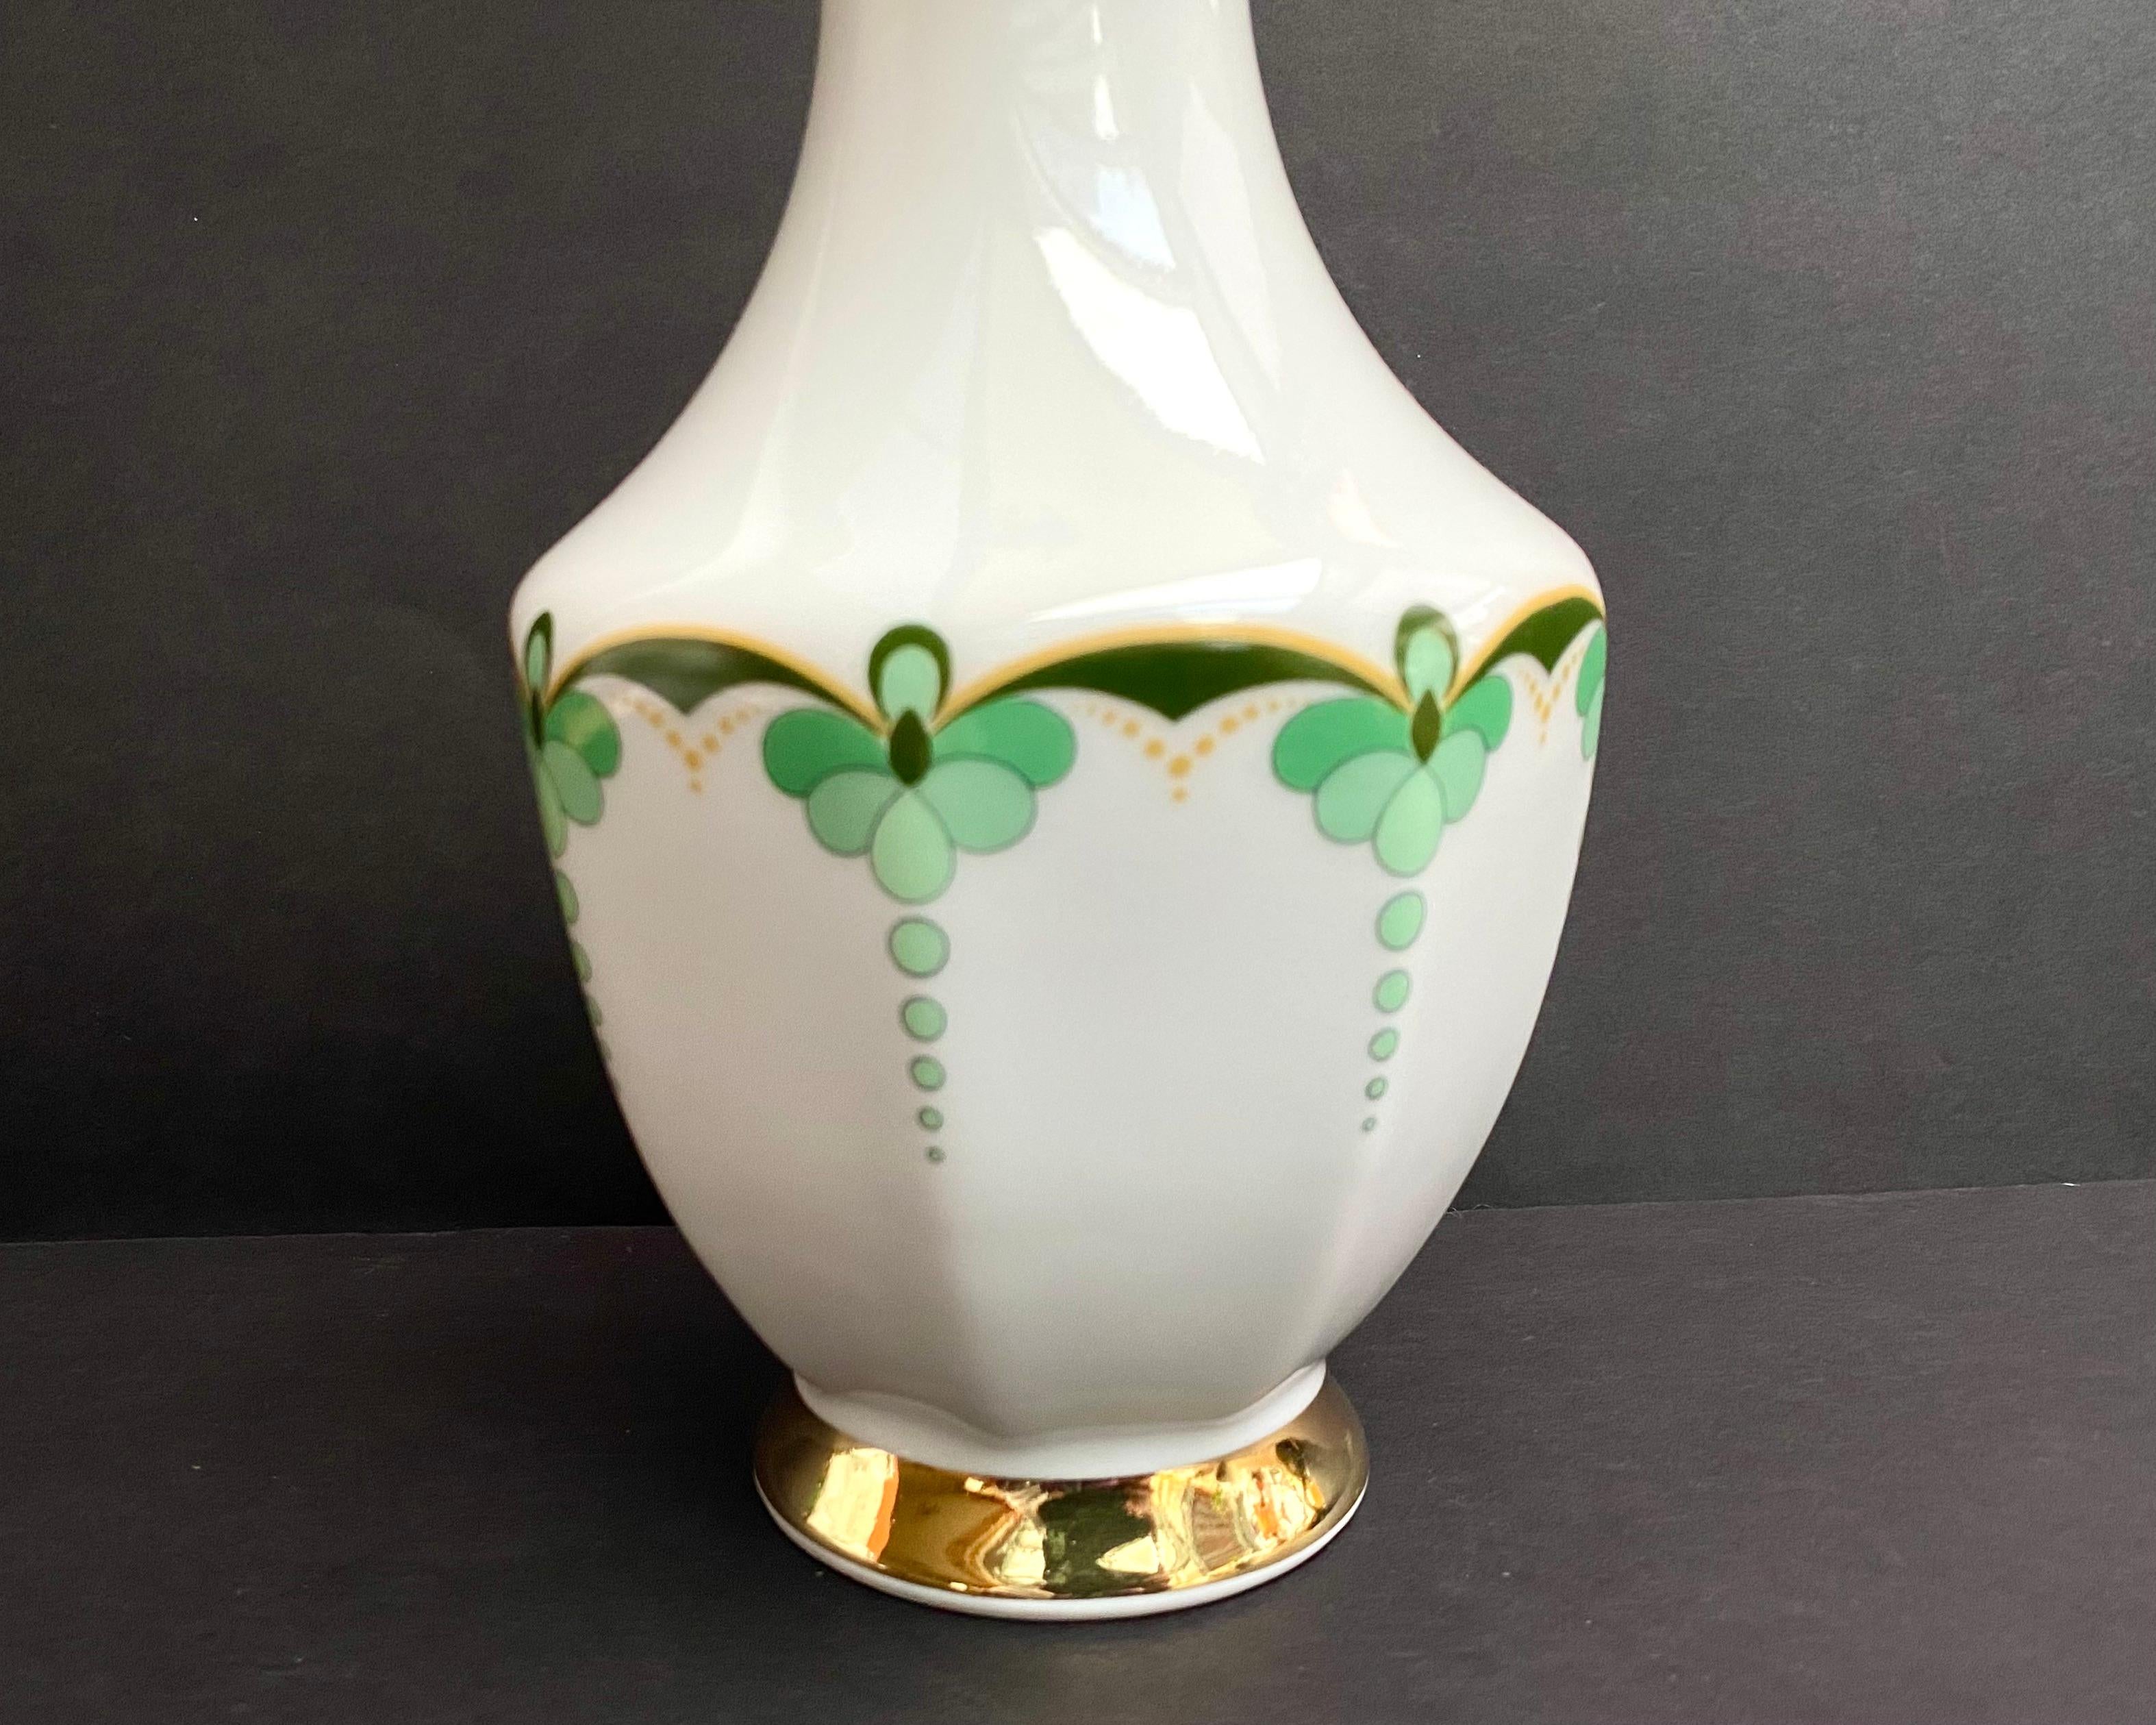 Beautifull vintage vase/jar in porcelain with green floral decor and gold plating from Vohenstrauss Johann Seltmann Bavaria

Circa 1970s, manufactured in Germany.

Stamped and numbered on the bottom.

Hand-painted floral motif.

With this vase you